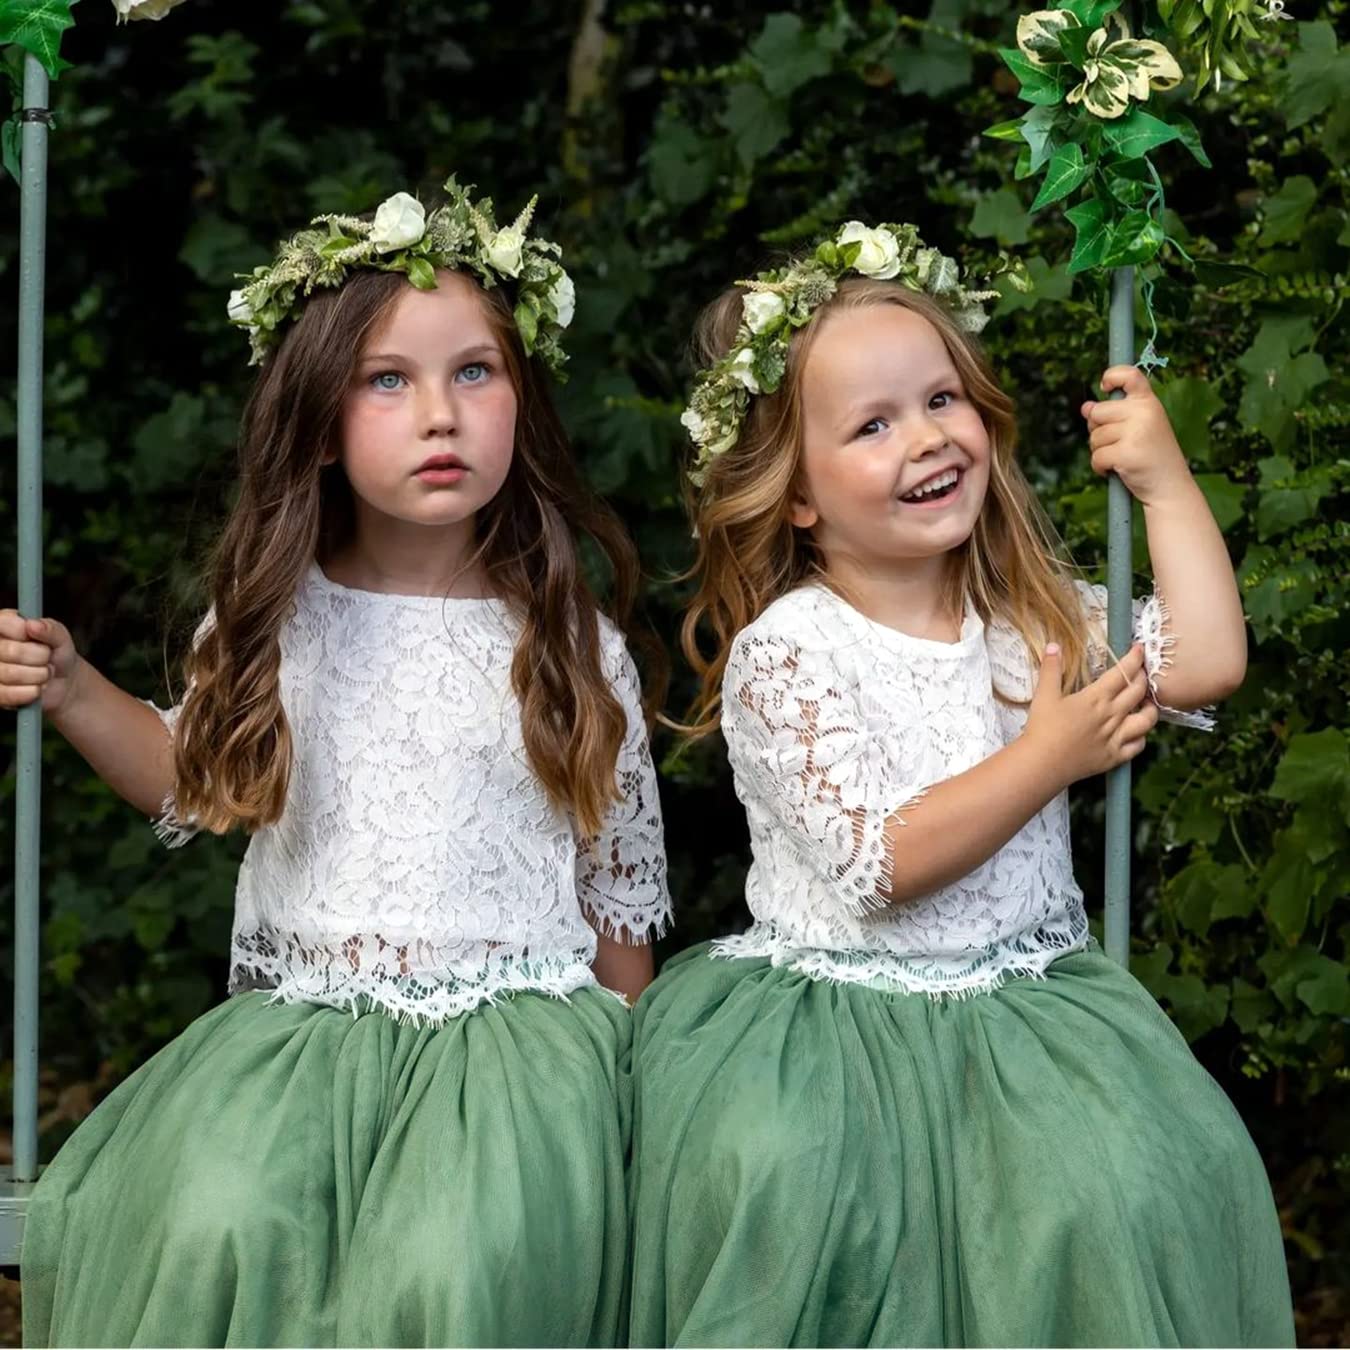 Scallop Lace 2 Piece Girl Dress Set in Sage - 2BUNNIES